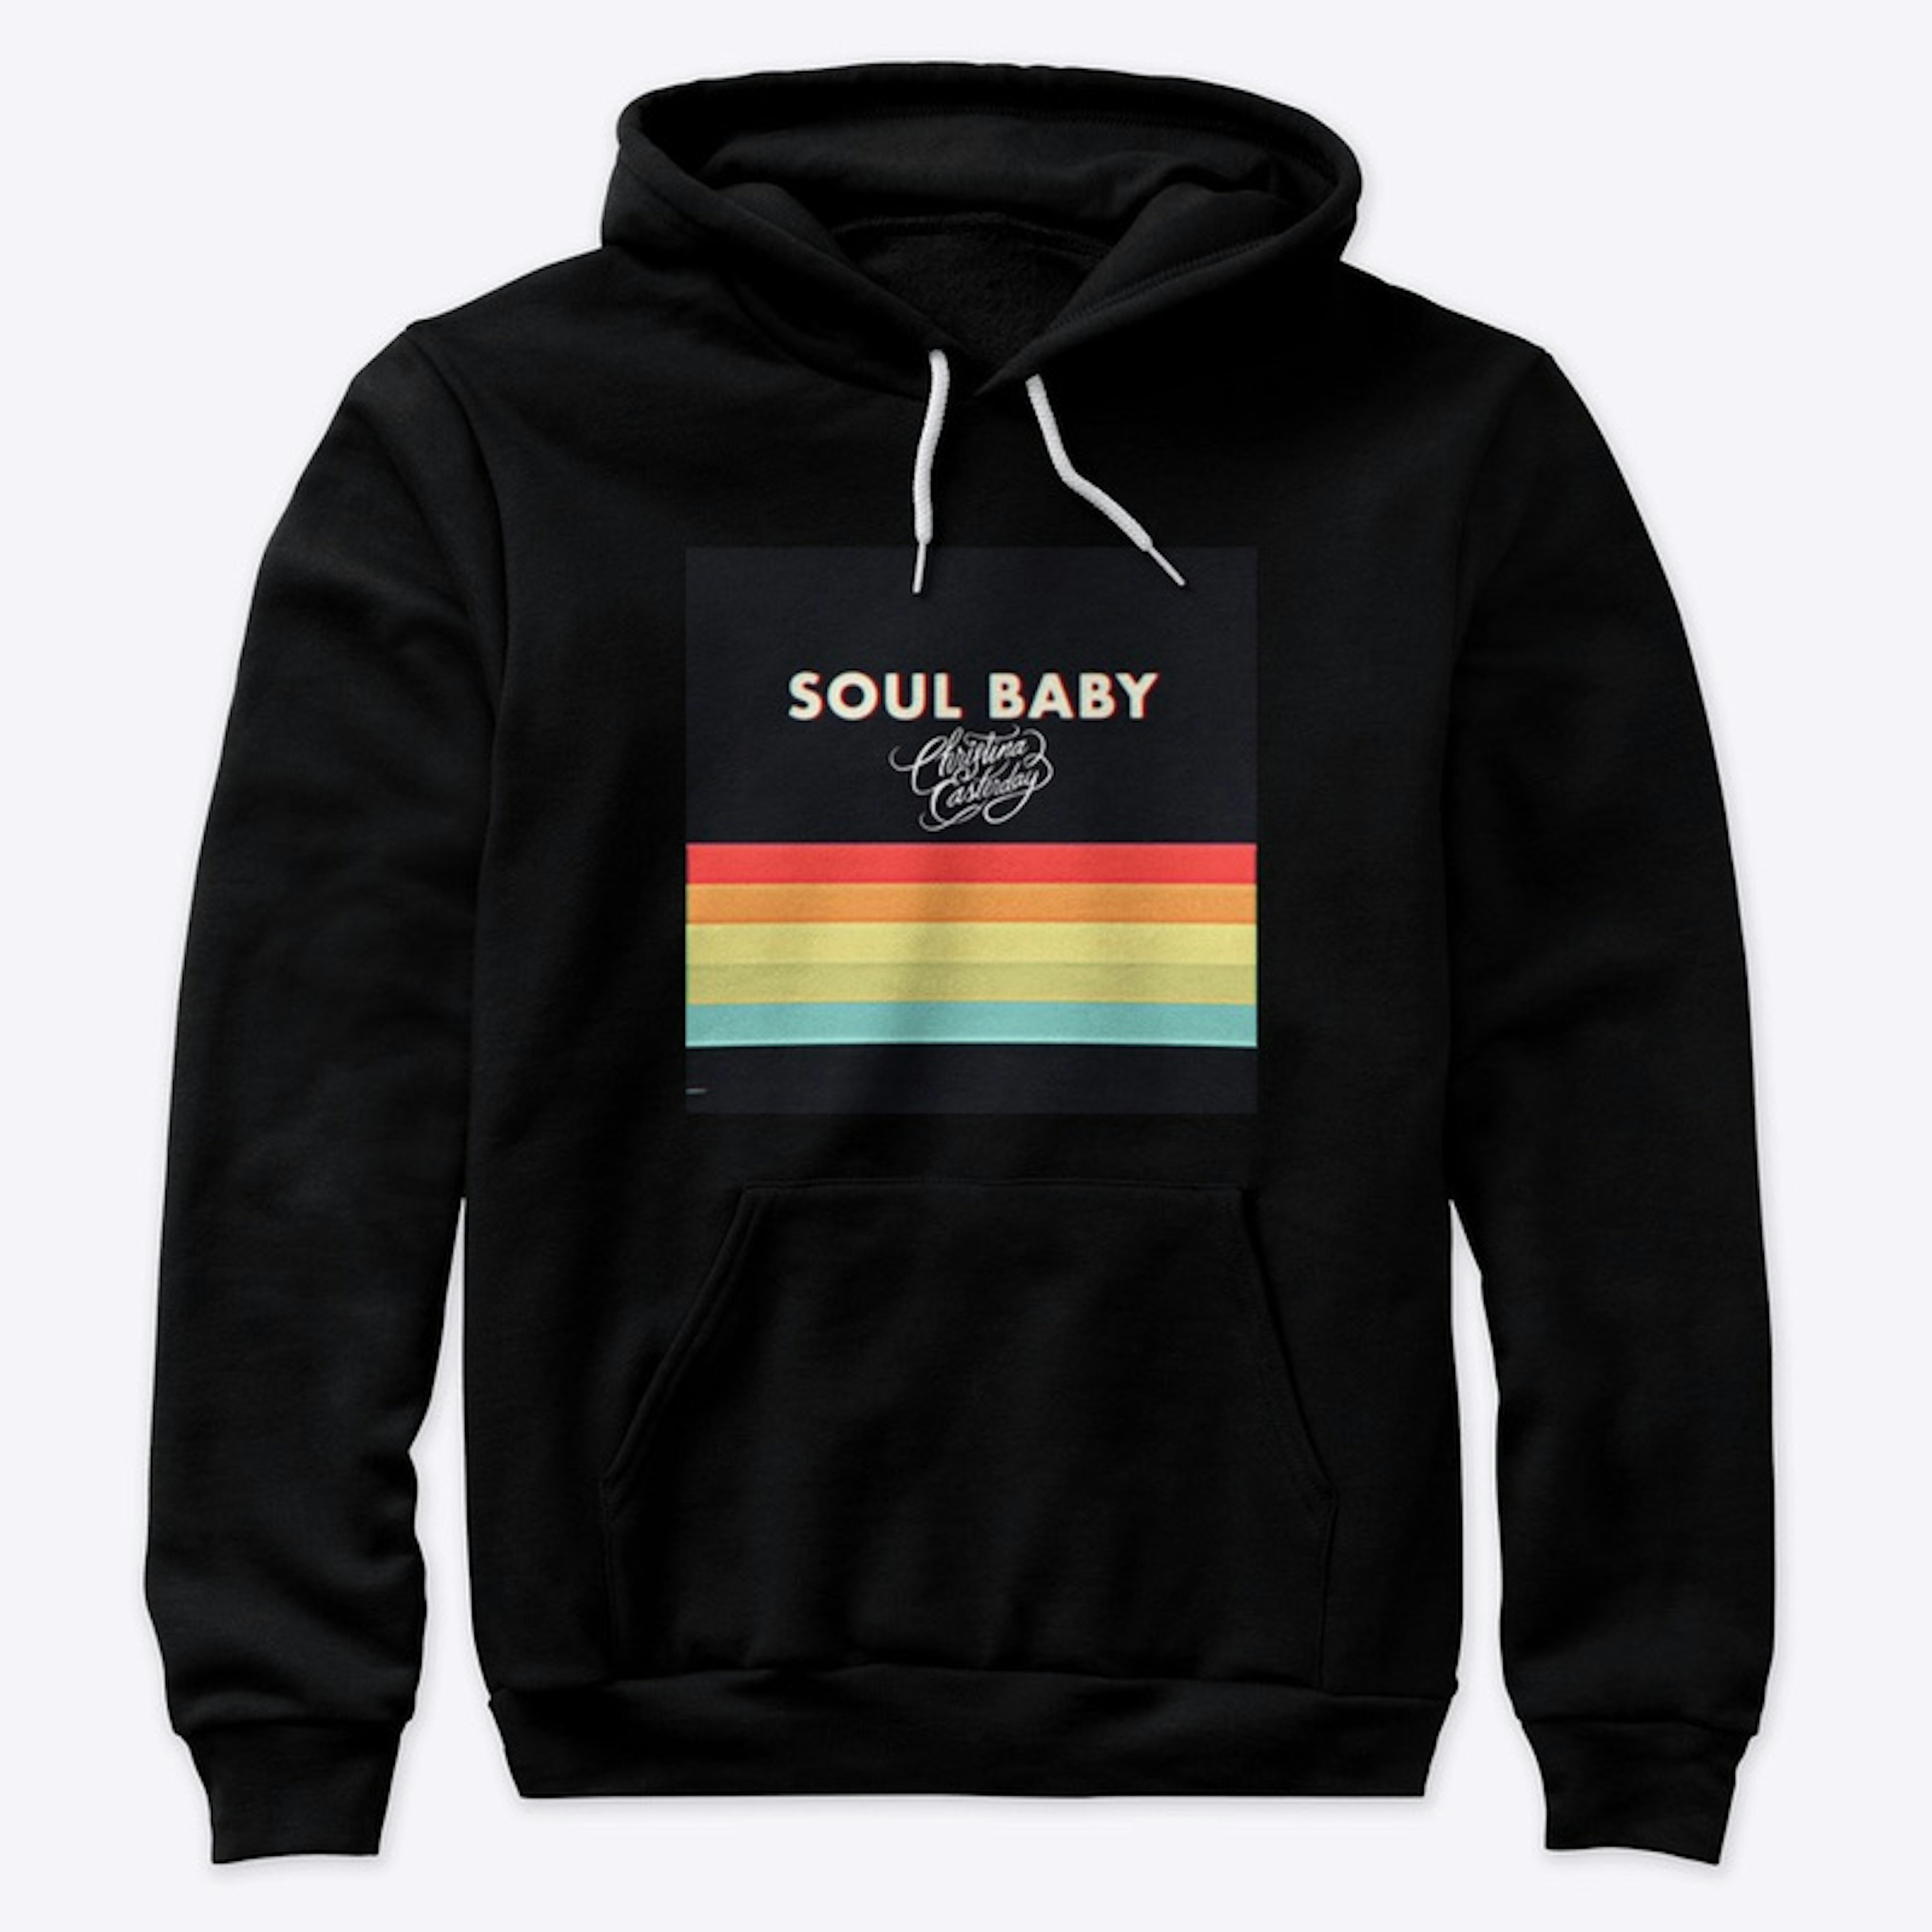 LIMITED EDITION Album Cover Hoodie